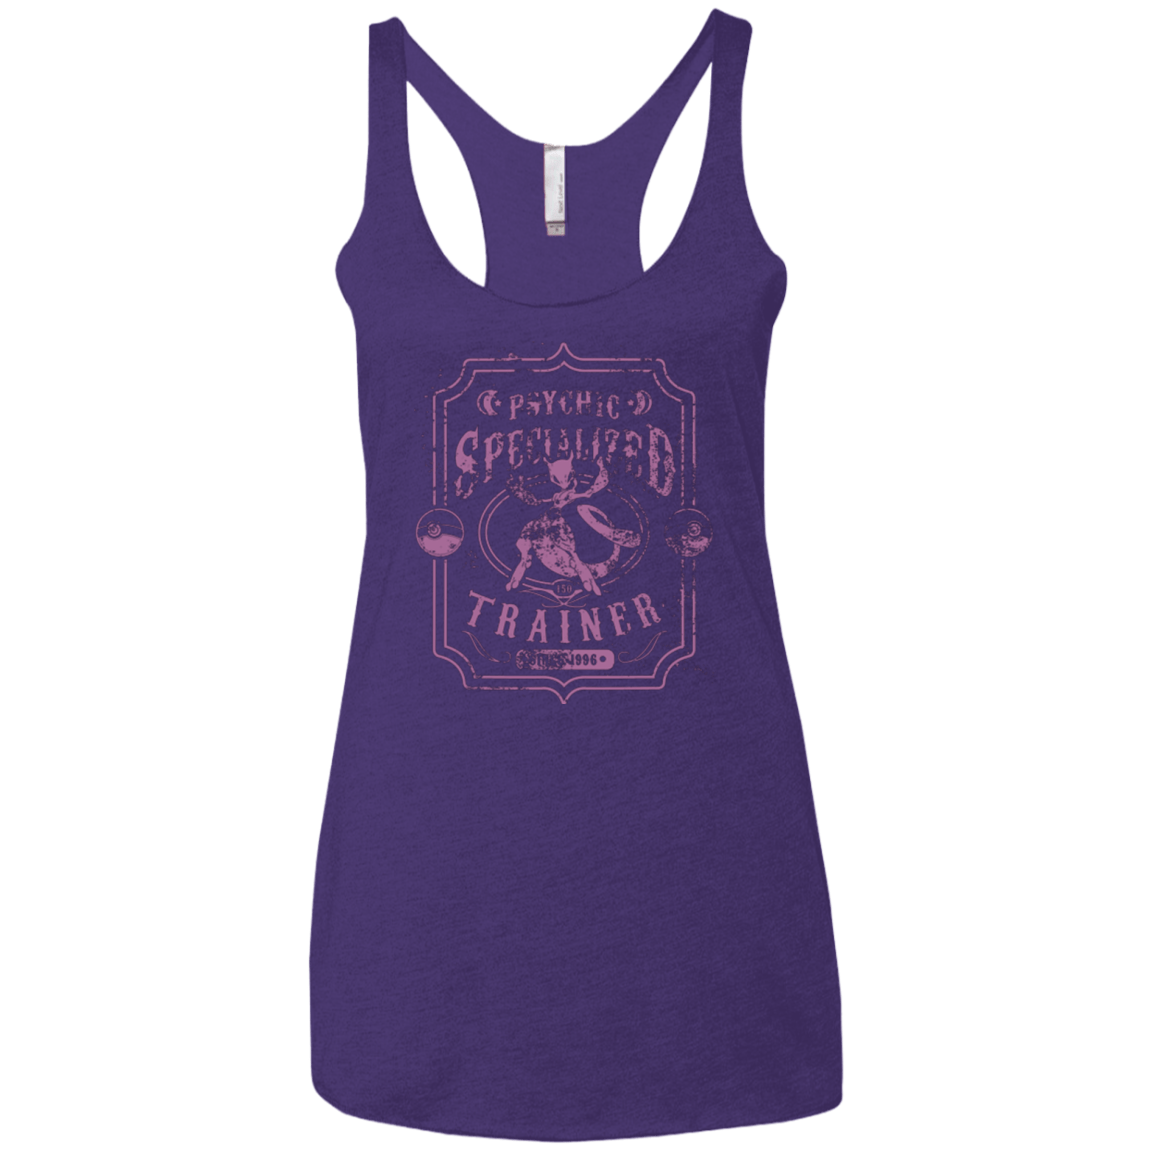 T-Shirts Purple / X-Small Psychic Specialized Trainer 2 Women's Triblend Racerback Tank